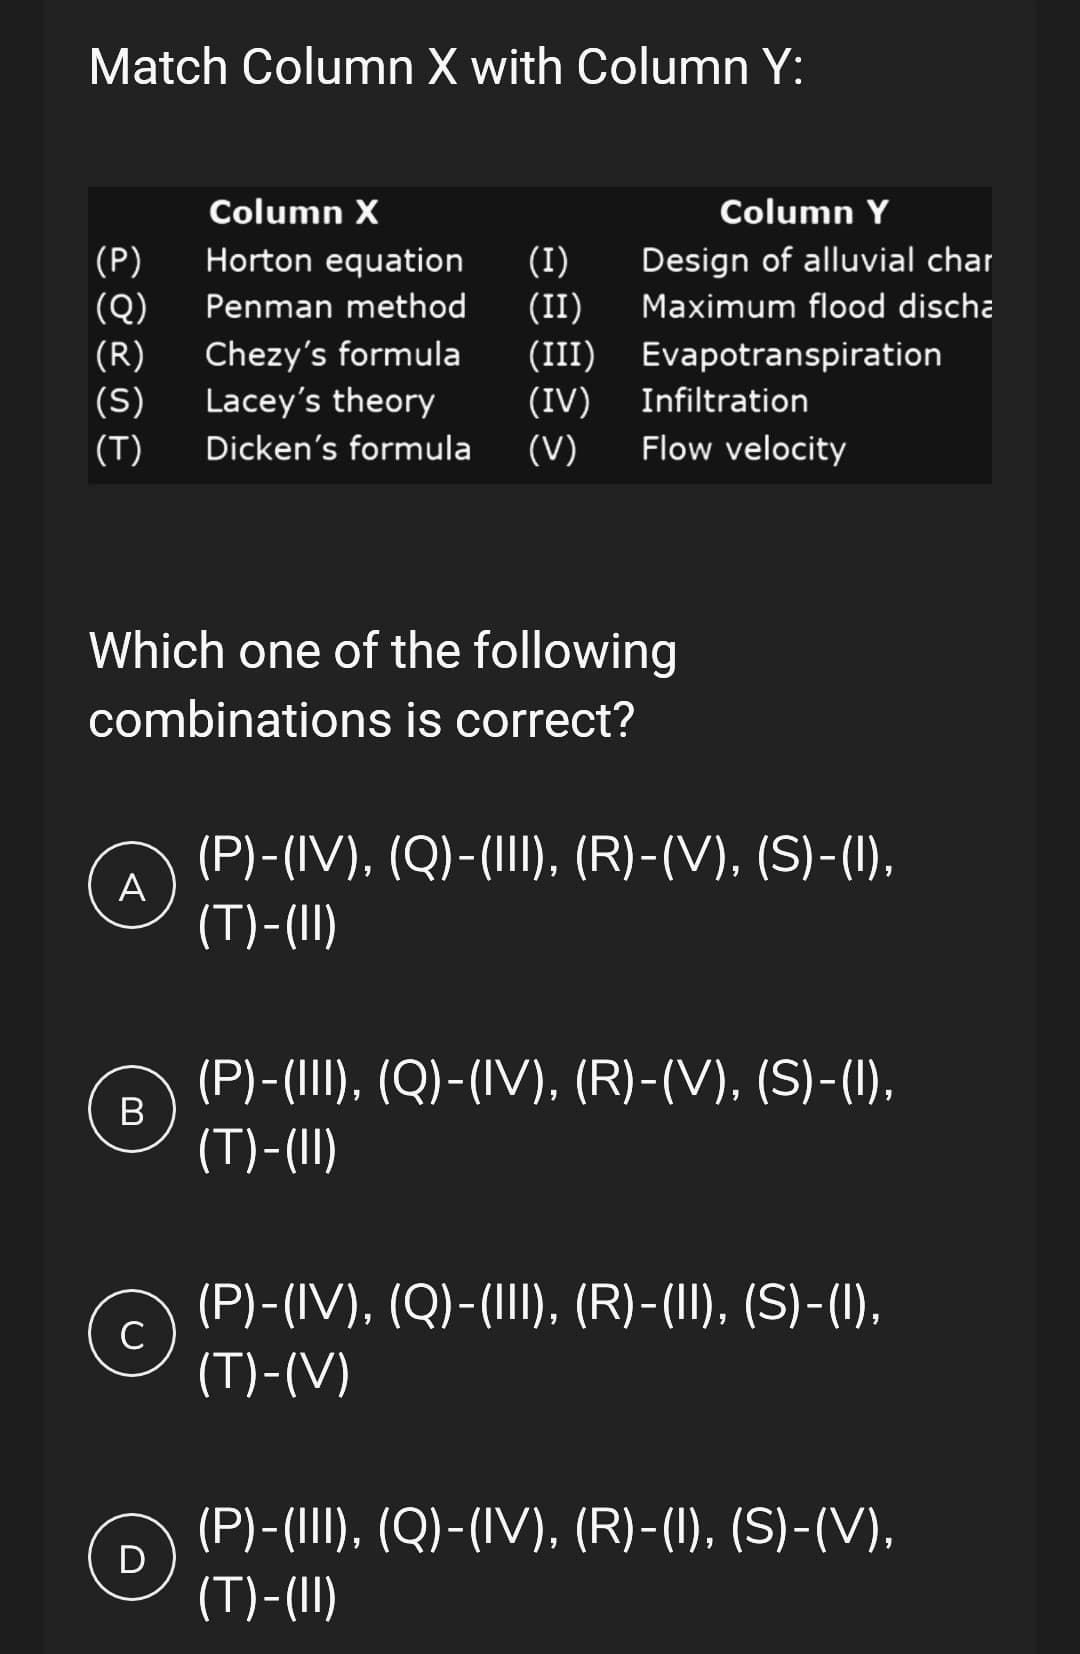 Match Column X with Column Y:
Column X
(P)
(Q)
Horton equation (I)
Penman method (II)
(R) Chezy's formula
Lacey's theory
(III)
(S)
(IV) Infiltration
(T) Dicken's formula (V) Flow velocity
Which one of the following
combinations is correct?
A
Column Y
Design of alluvial char
Maximum flood discha
Evapotranspiration
B
с
(P)-(IV), (Q)-(III), (R)-(V), (S)-(I),
(T)-(II)
(P)-(III), (Q)-(IV), (R)-(V), (S)-(I),
(T)-(II)
(P)-(IV), (Q)-(III), (R)-(II), (S)-(I),
(T)-(V)
(P)-(III), (Q)-(IV), (R)-(I), (S)-(V),
(T)-(II)